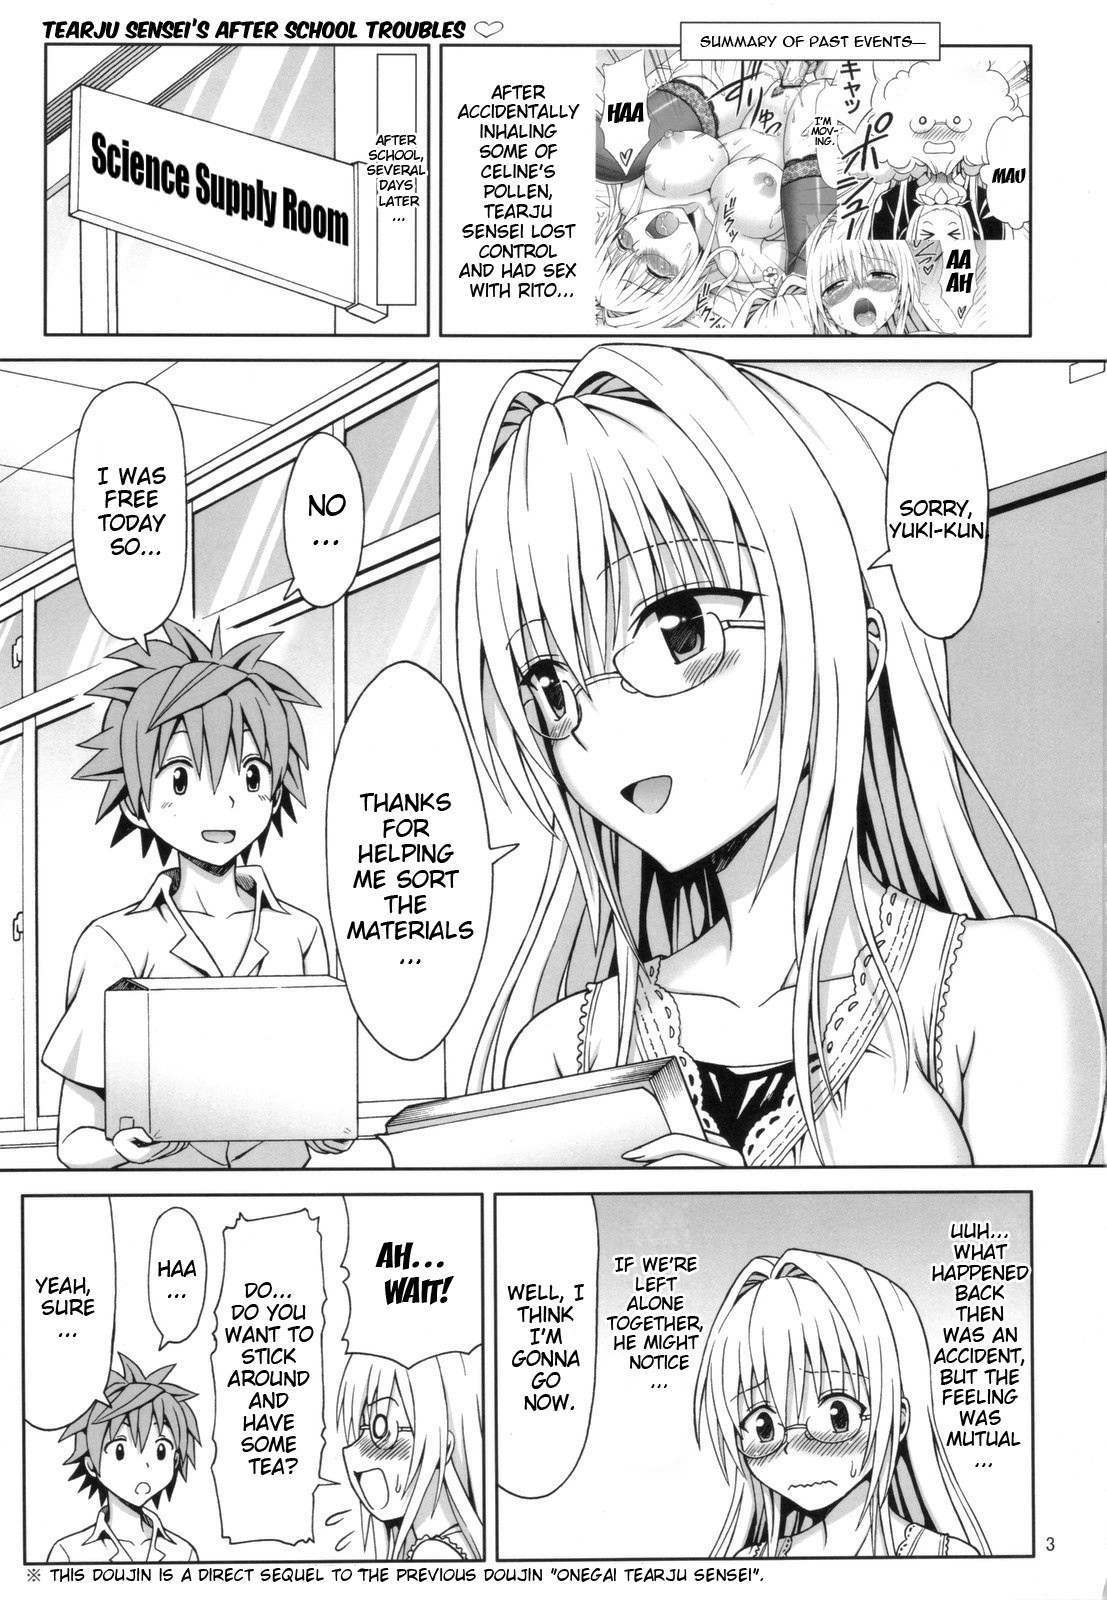 After-School Trouble hentai manga picture 2